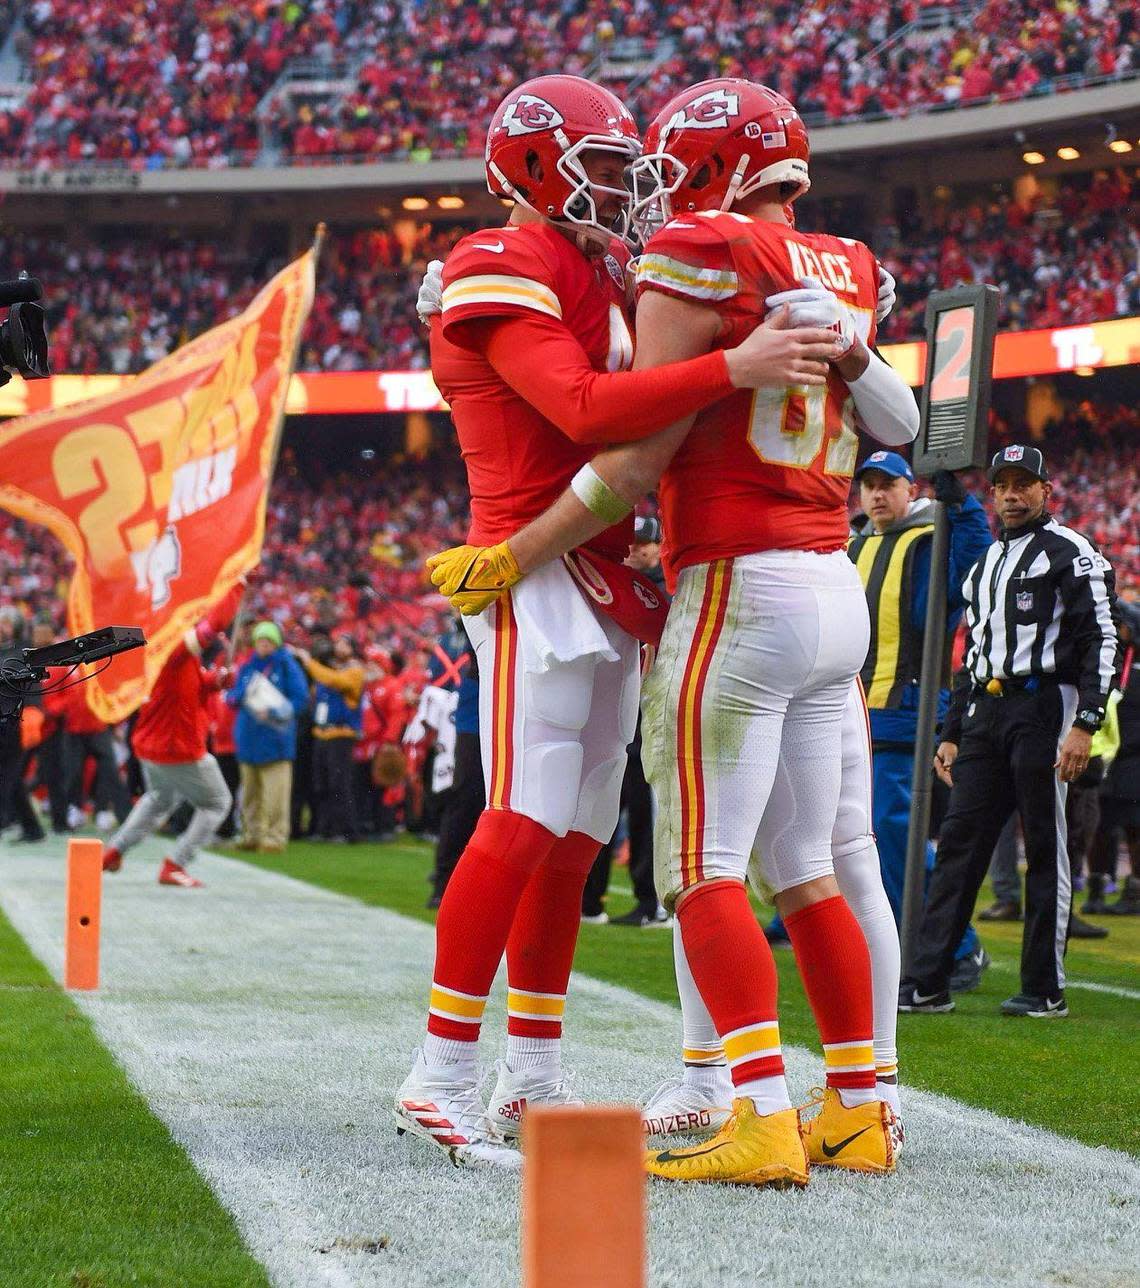 Kansas City Chiefs quarterback Chad Henne, left, celebrates with tight end Travis Kelce after Kelce scored with a pass reception in the second quarter against the Jacksonville Jaguars during the Divisional Round game Saturday, Jan. 21, 2023 at GEHA Field at Arrowhead Stadium.